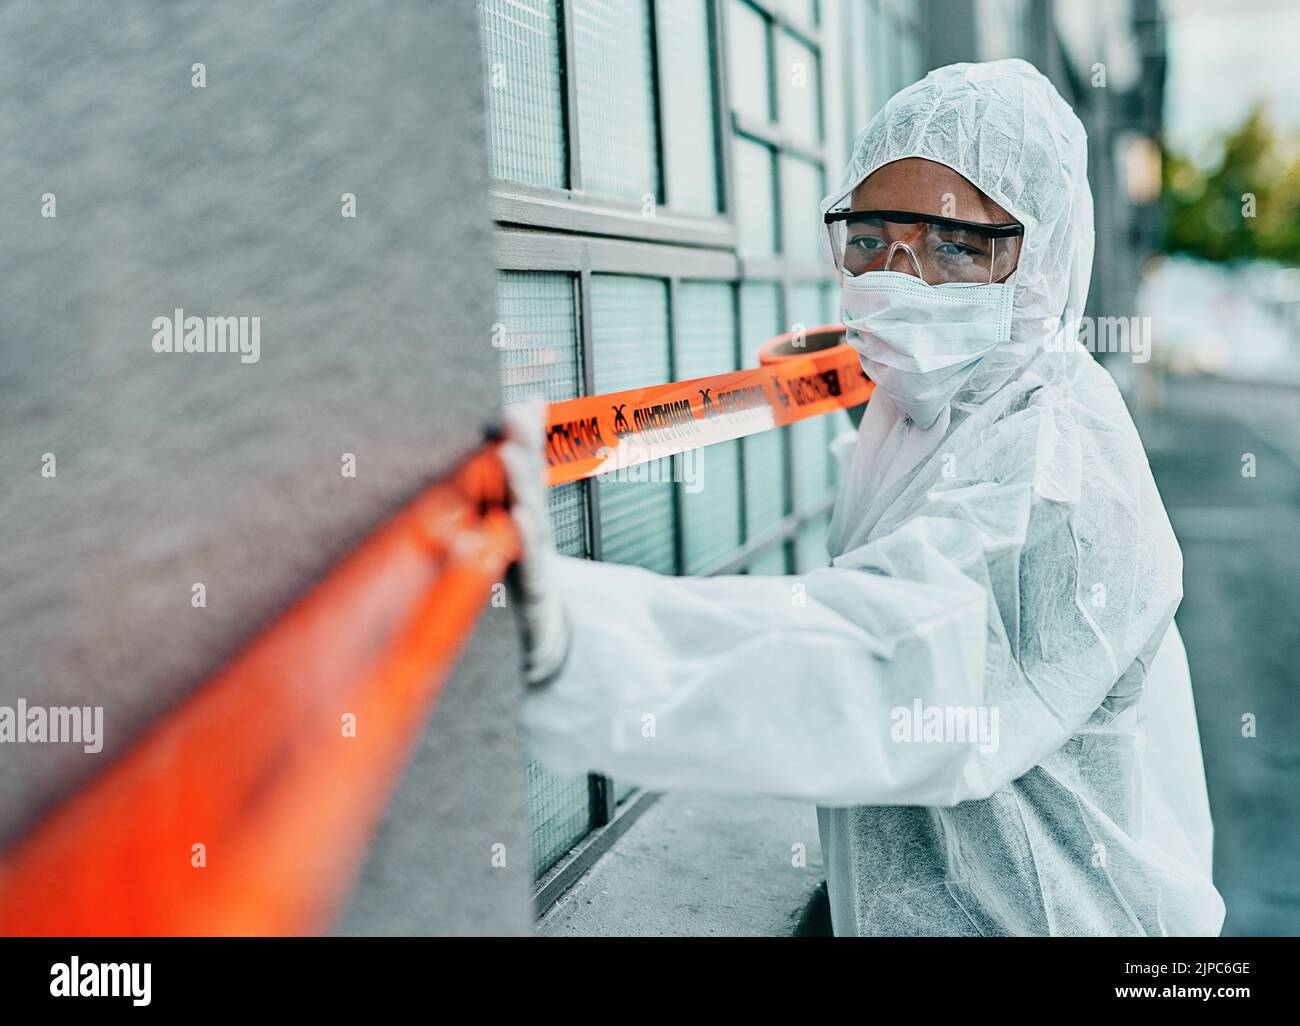 Covid healthcare worker responding to a biohazard in a public area using barrier tape outside. First responder in protection hazmat suit and mask Stock Photo